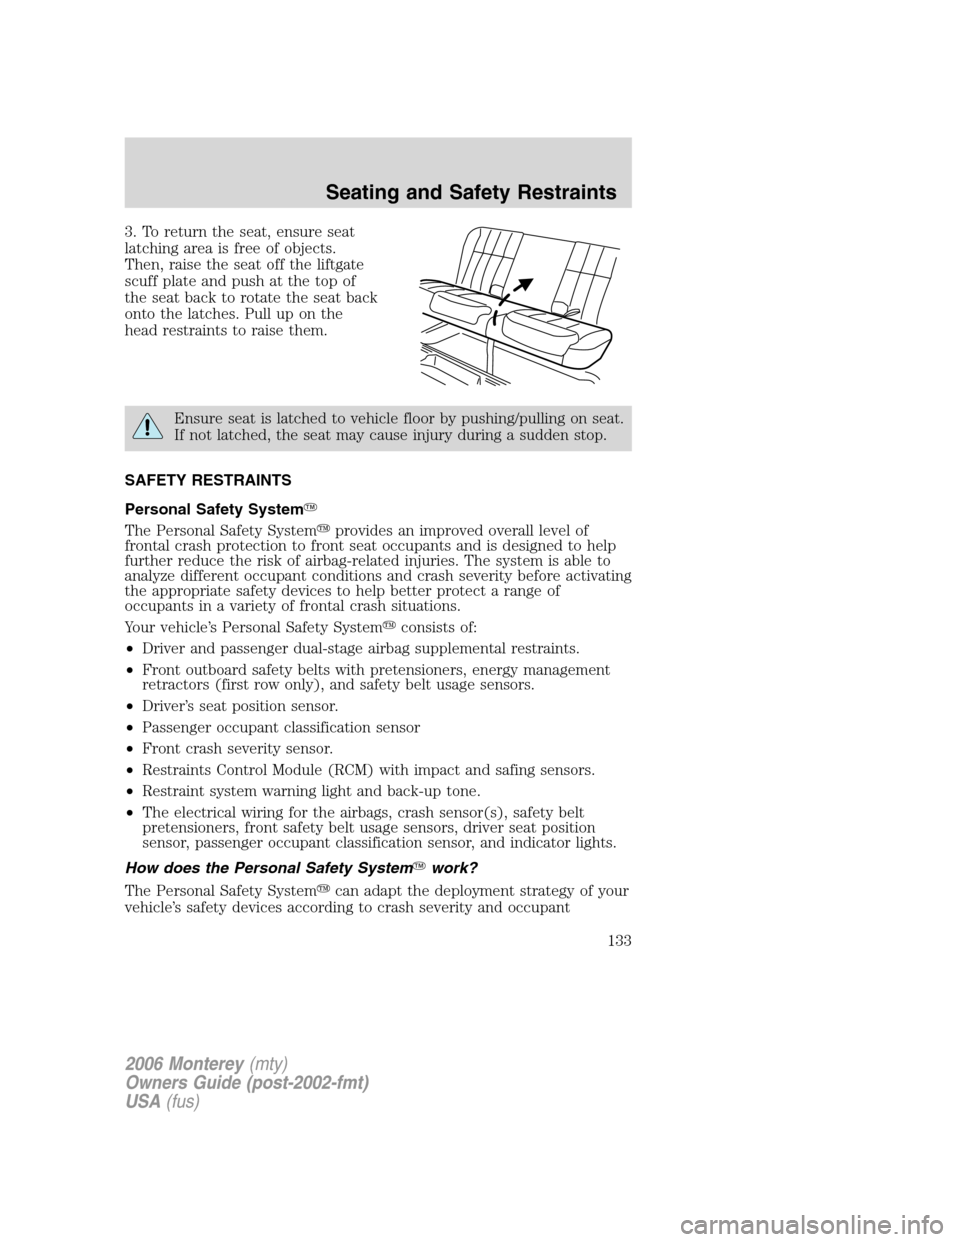 Mercury Monterey 2006  Owners Manuals 3. To return the seat, ensure seat
latching area is free of objects.
Then, raise the seat off the liftgate
scuff plate and push at the top of
the seat back to rotate the seat back
onto the latches. Pu